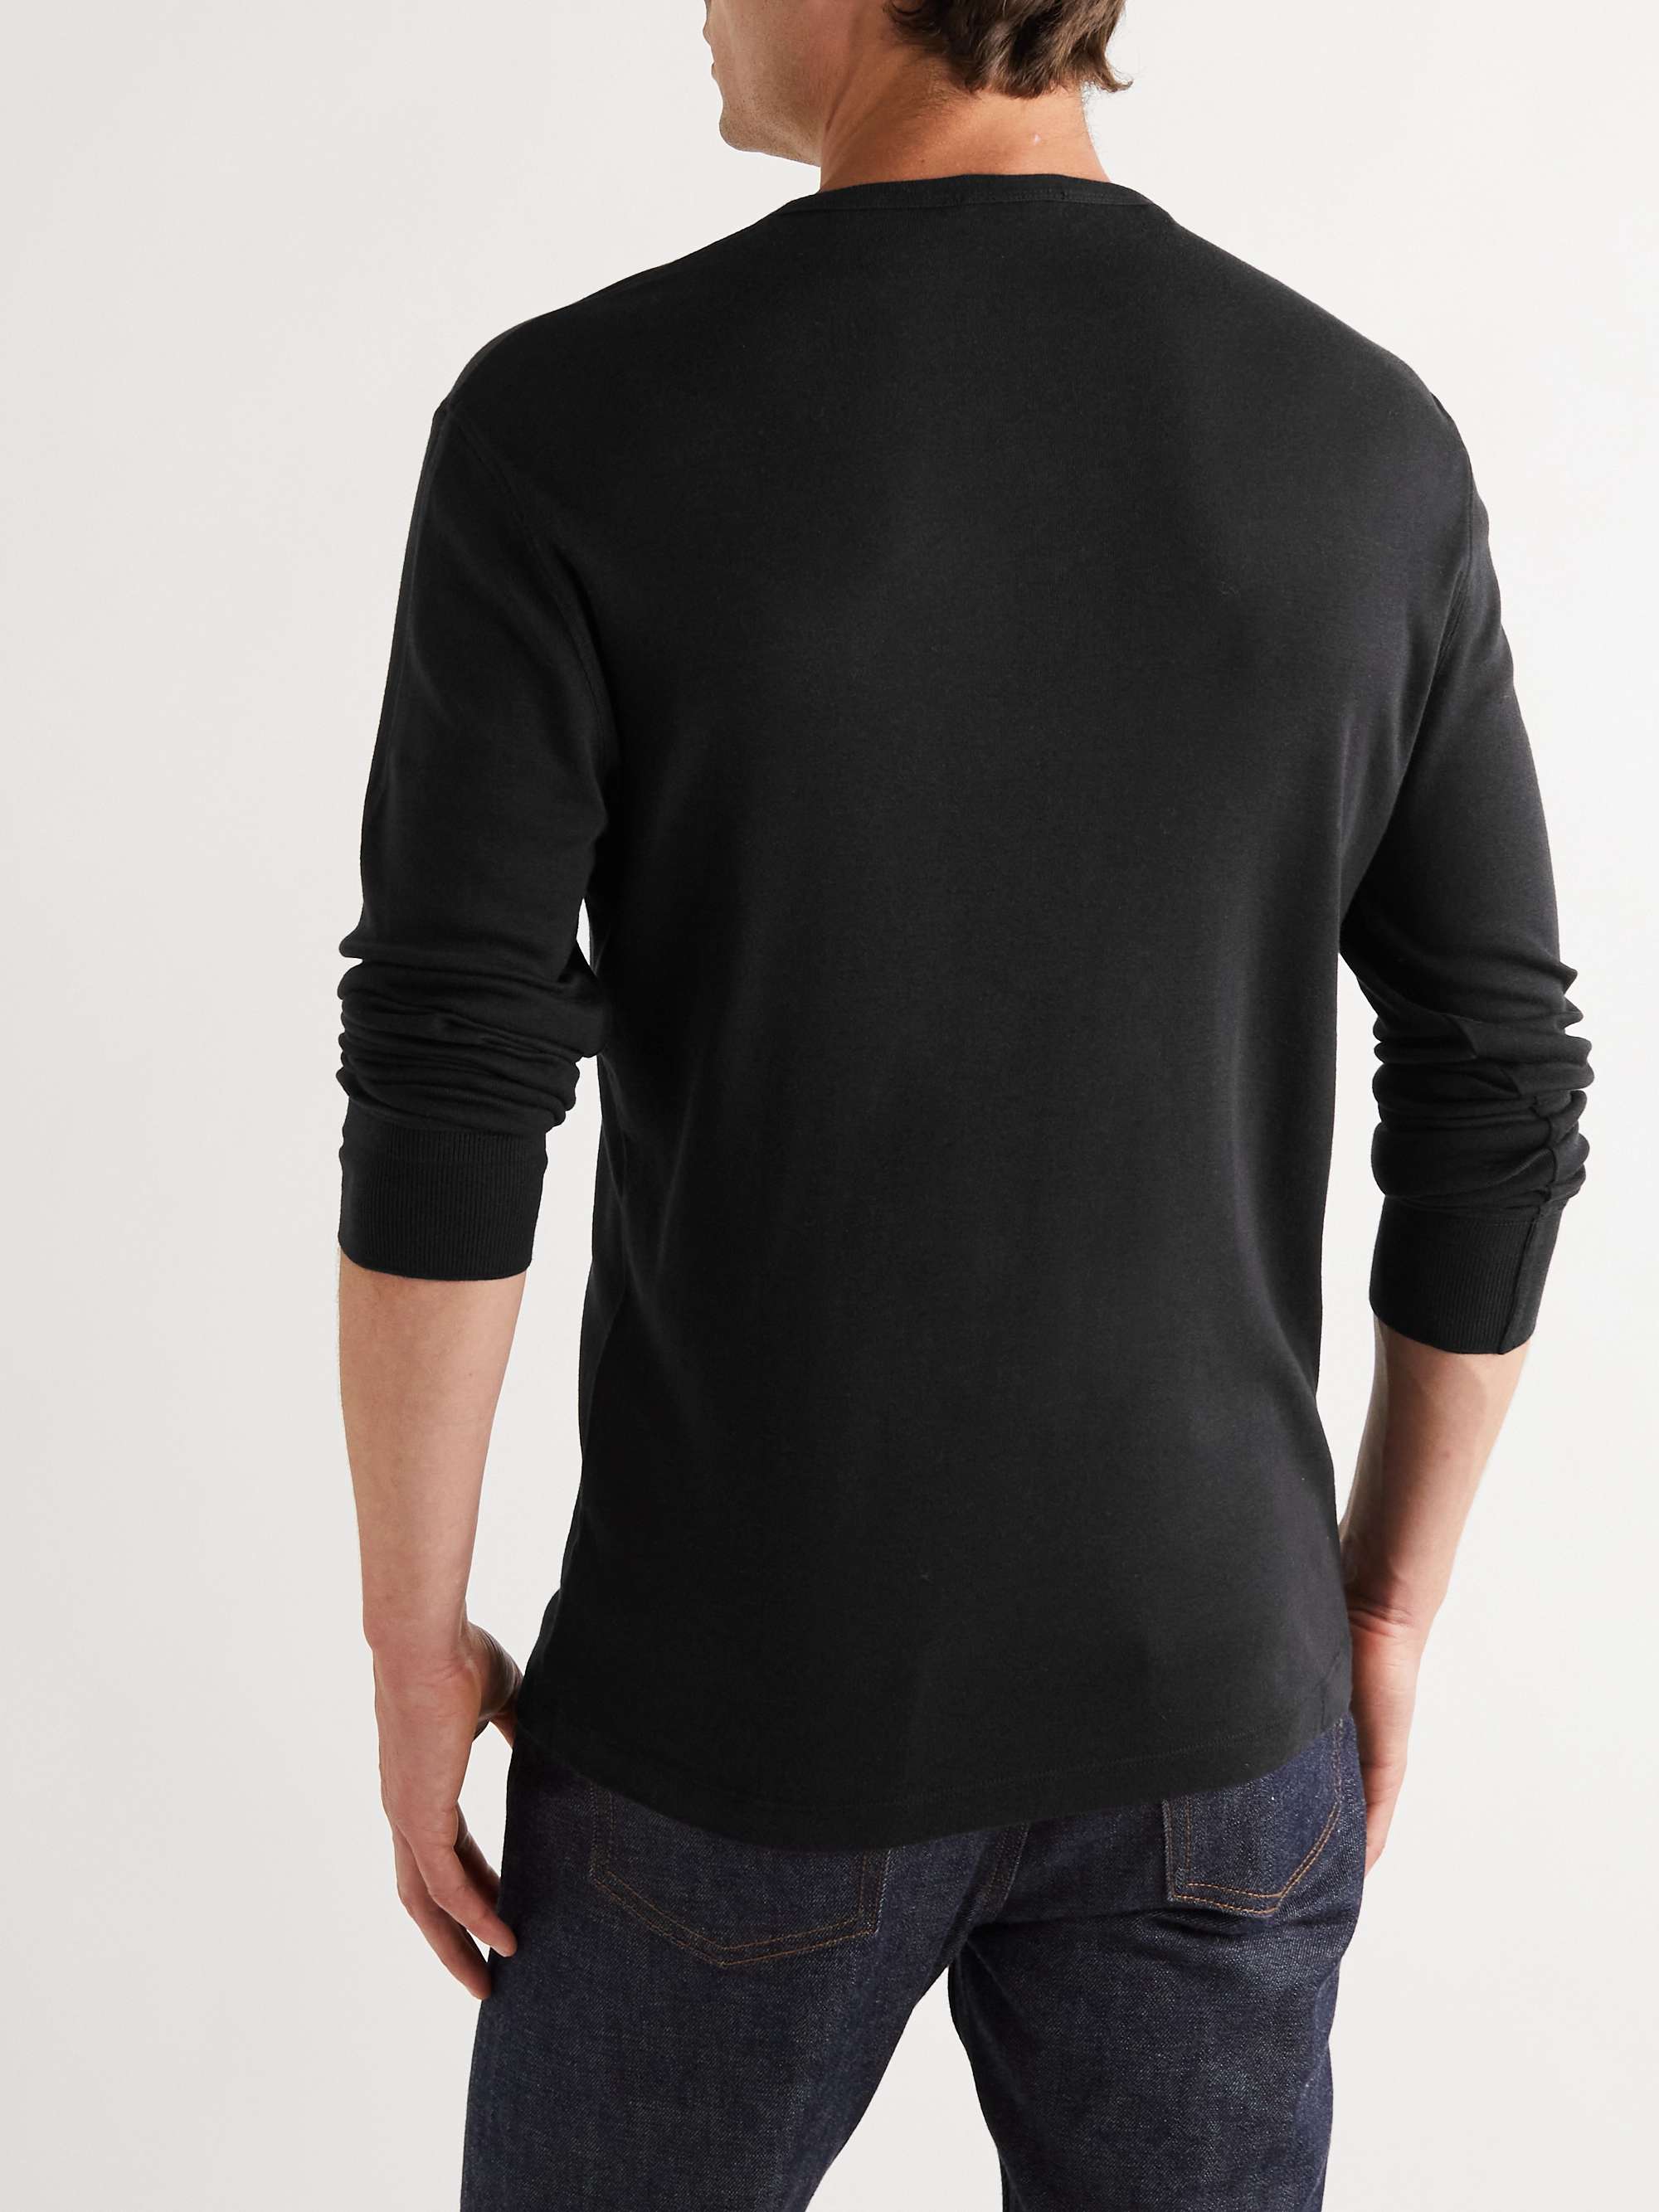 TOM FORD Slim-Fit Cotton and Modal-Blend Jersey Henley T-Shirt